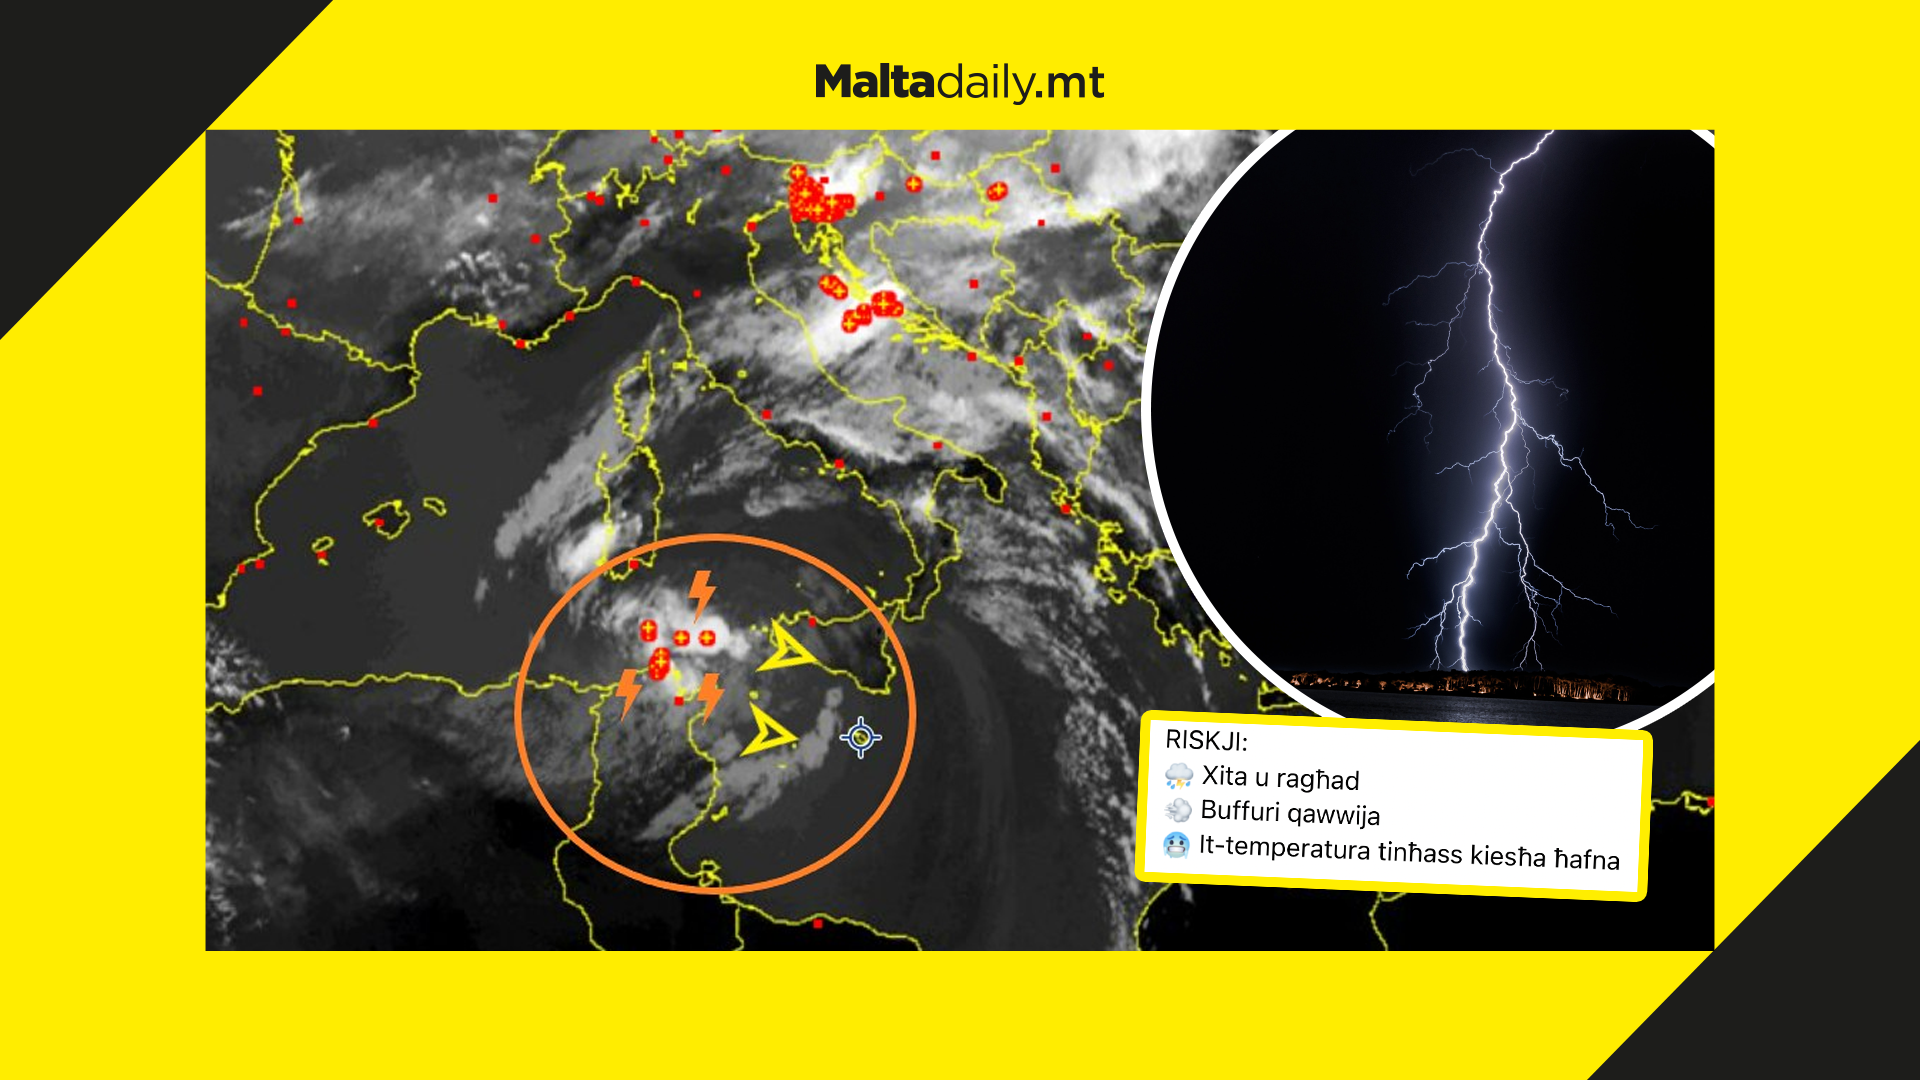 Maltese weather page forecasts potential rain, thunder & heavy winds on Saturday evening